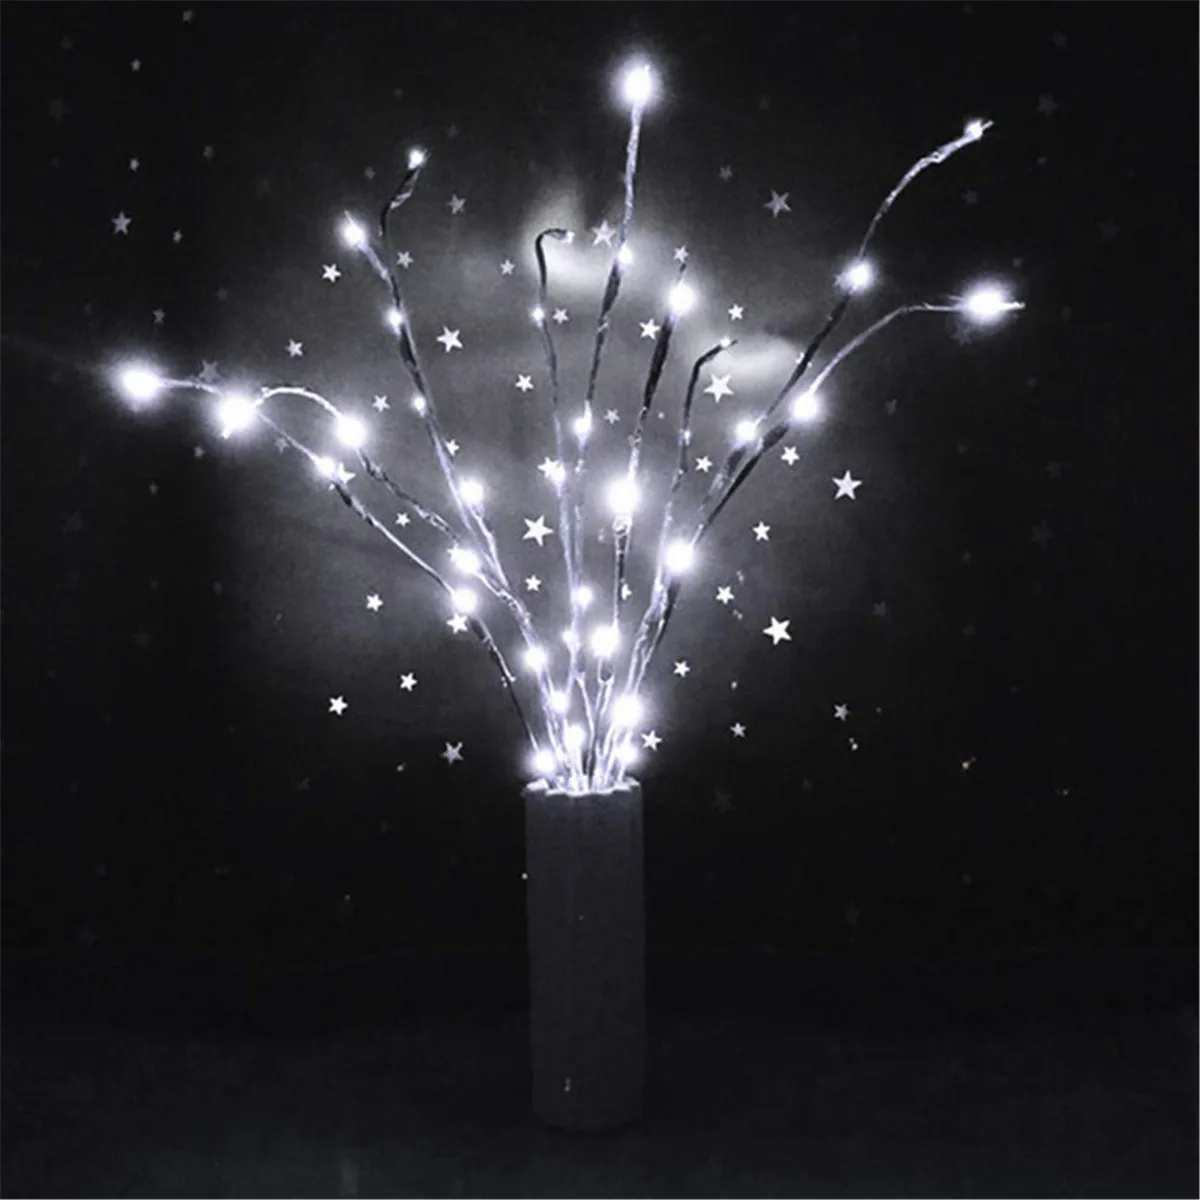 20 Bulbs LED Willow Branch Lights Lamp Natural Tall Vase Filler Willow Tree Branch Christmas Home Wedding Decorative Lights - Цвет абажура: White light